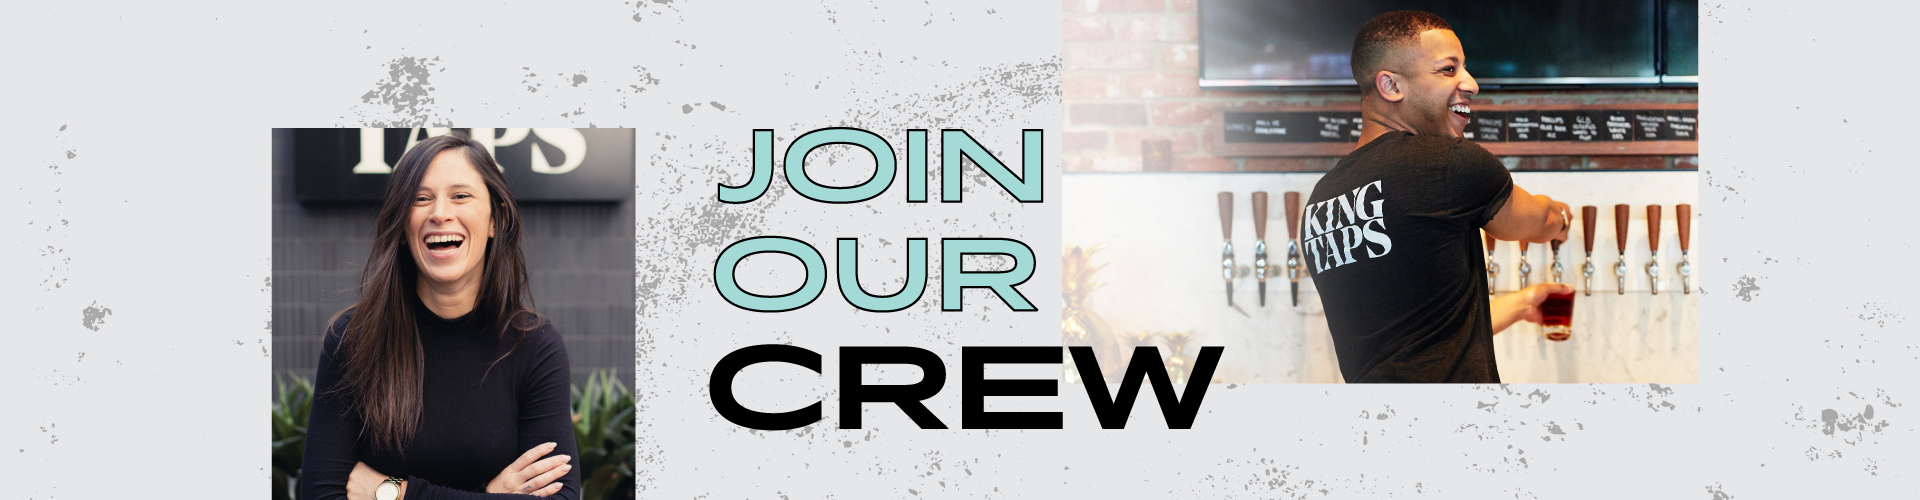 King Taps Hiring | Join Our Crew